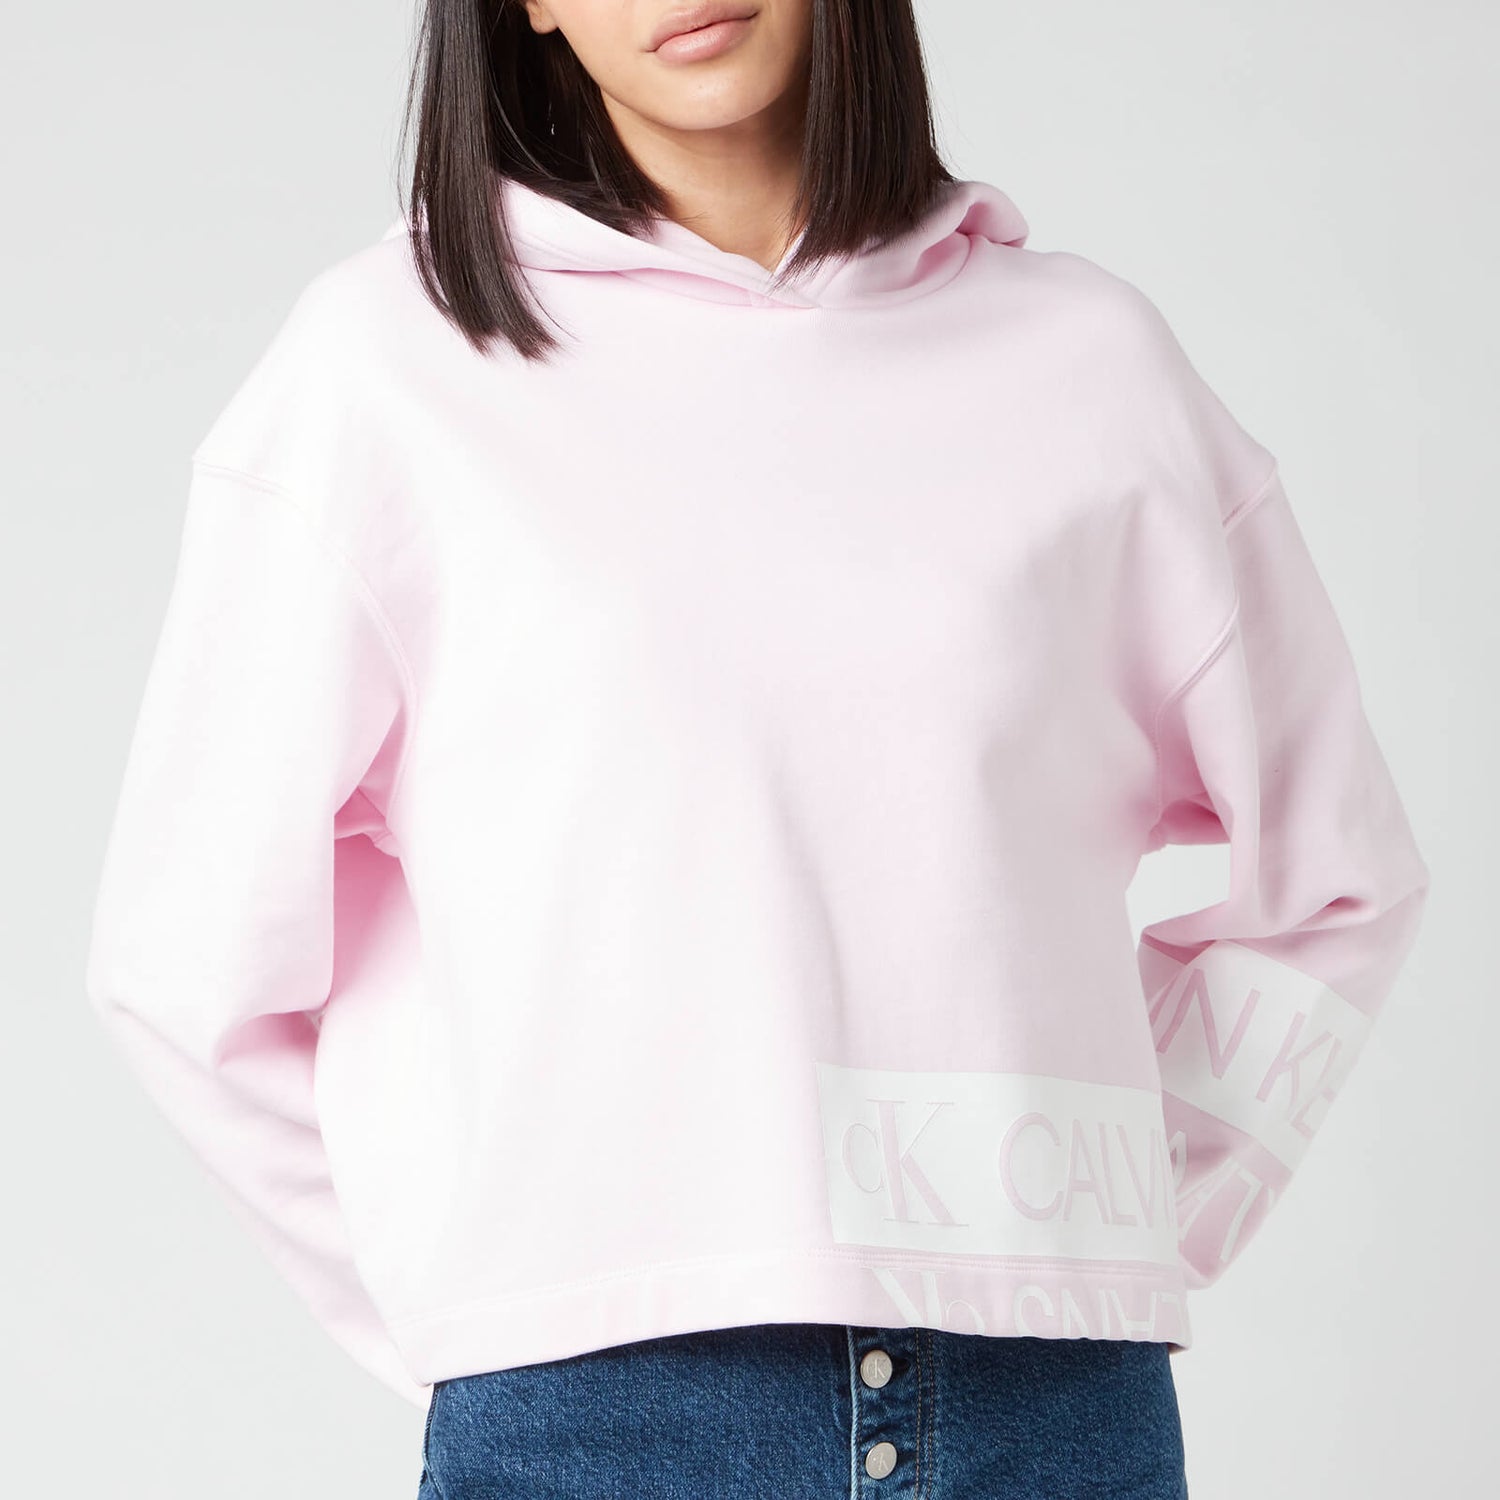 Calvin Klein Jeans Women's Mirrored Logo Hoodie - Pearly Pink